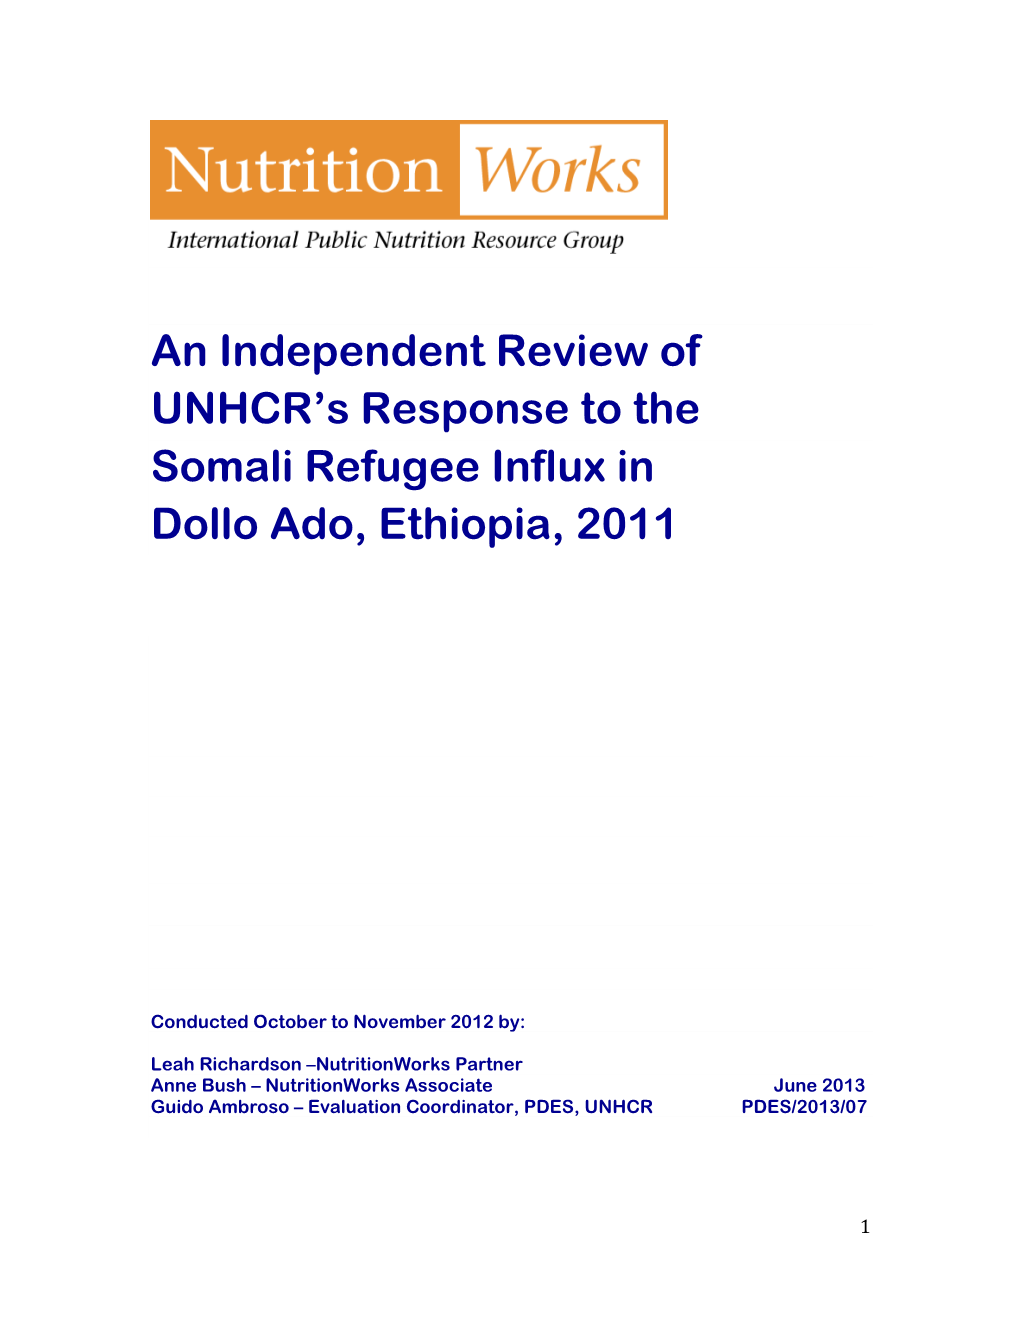 An Independent Review of UNHCR's Response to the Somali Refugee